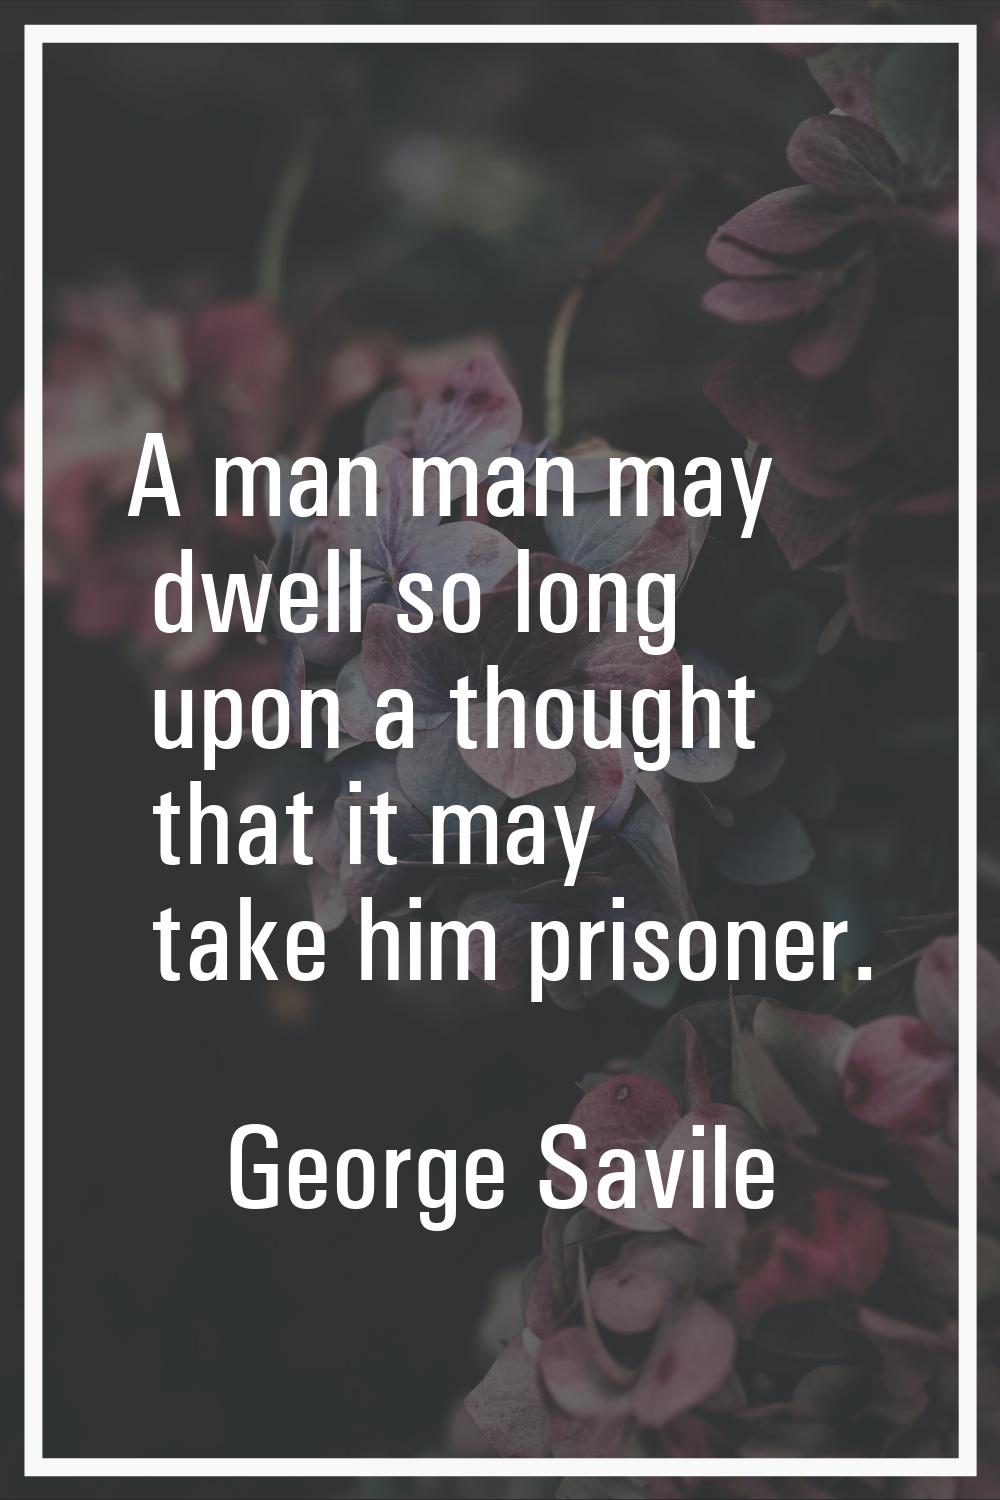 A man man may dwell so long upon a thought that it may take him prisoner.